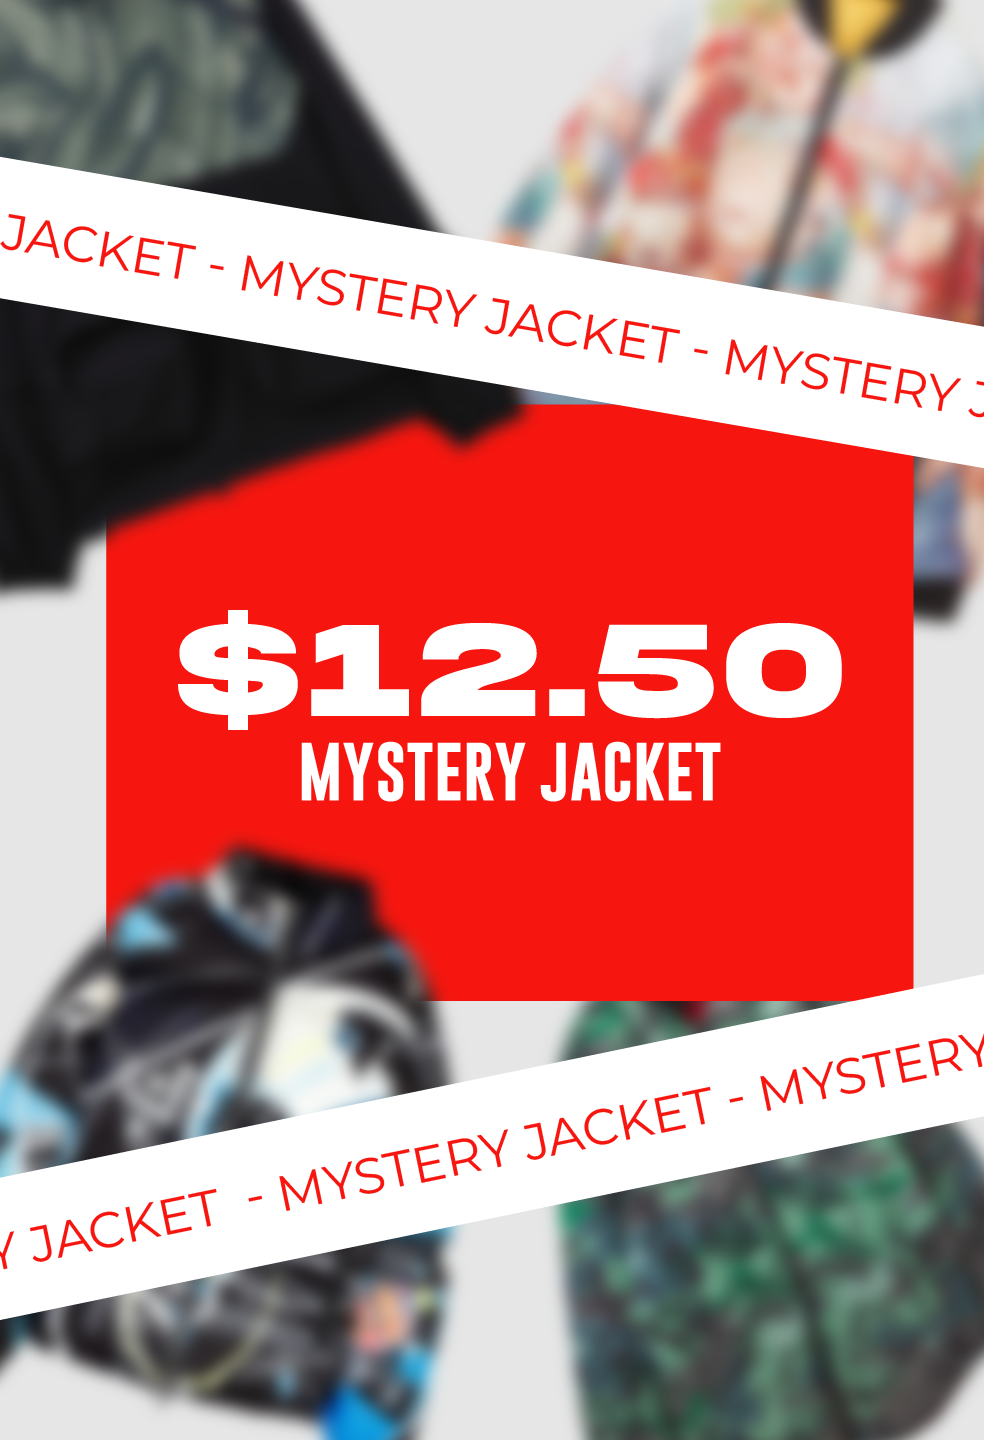 Mystery Jacket - Exclusive deal